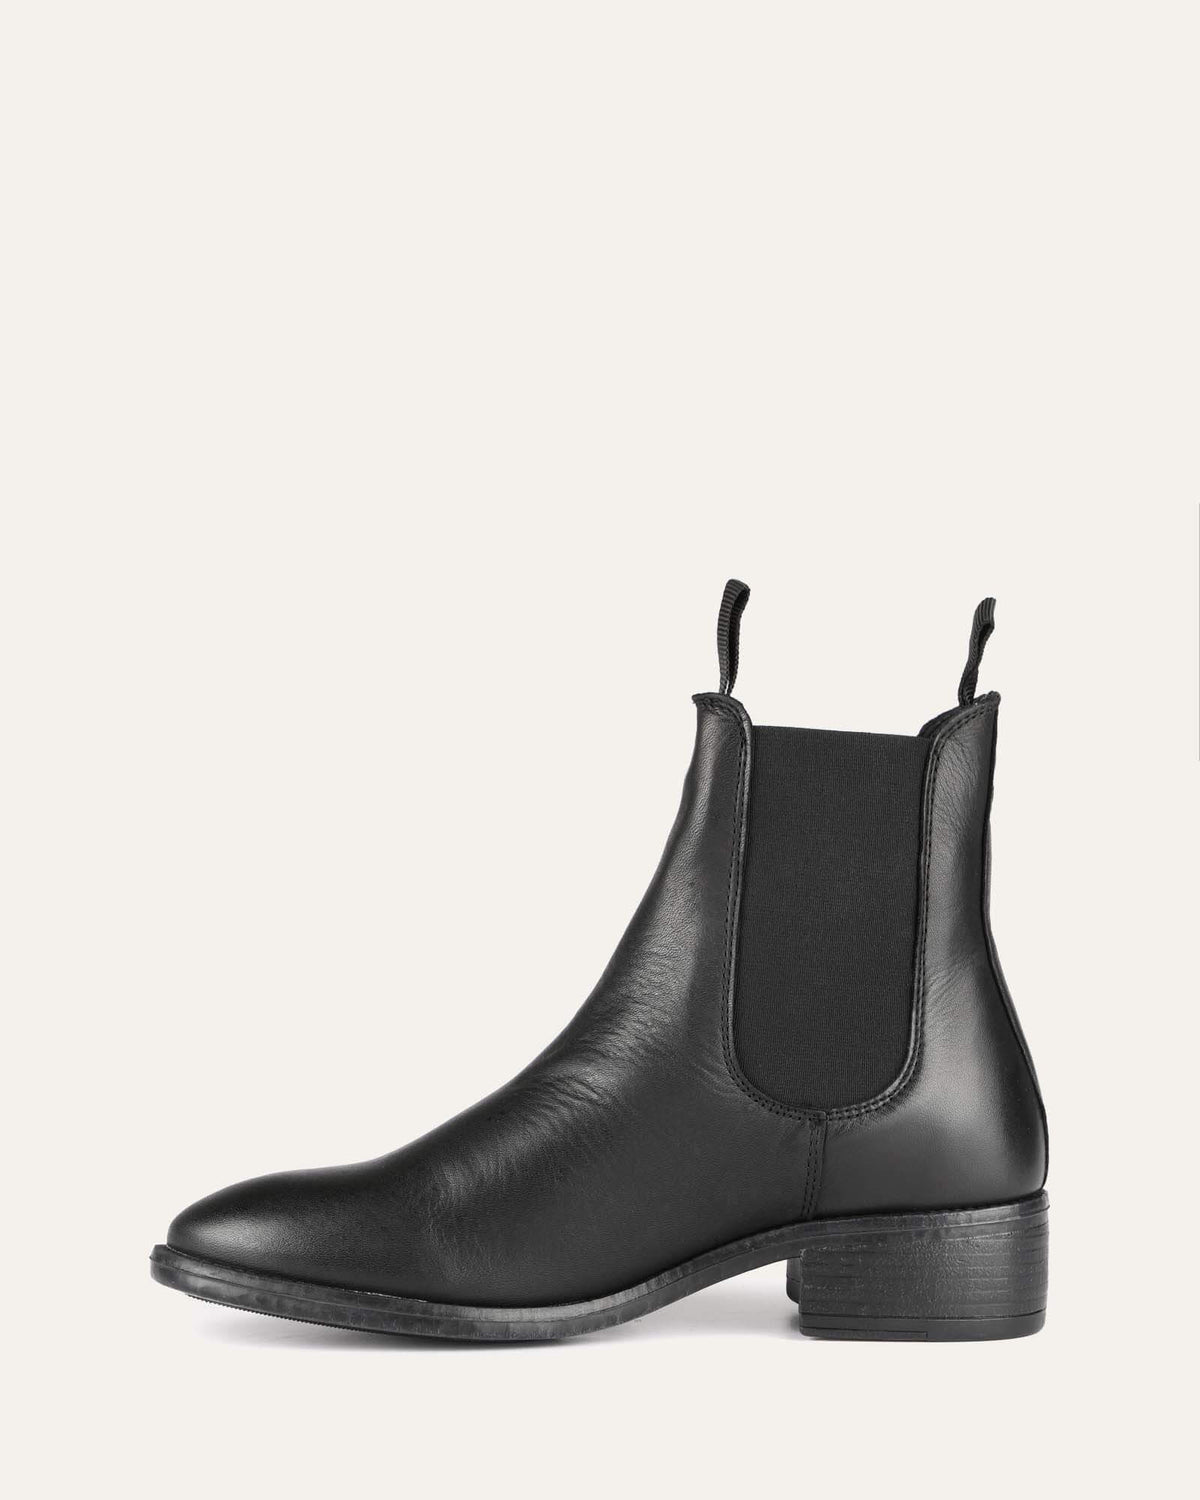 CISCO FLAT ANKLE BOOTS BLACK LEATHER